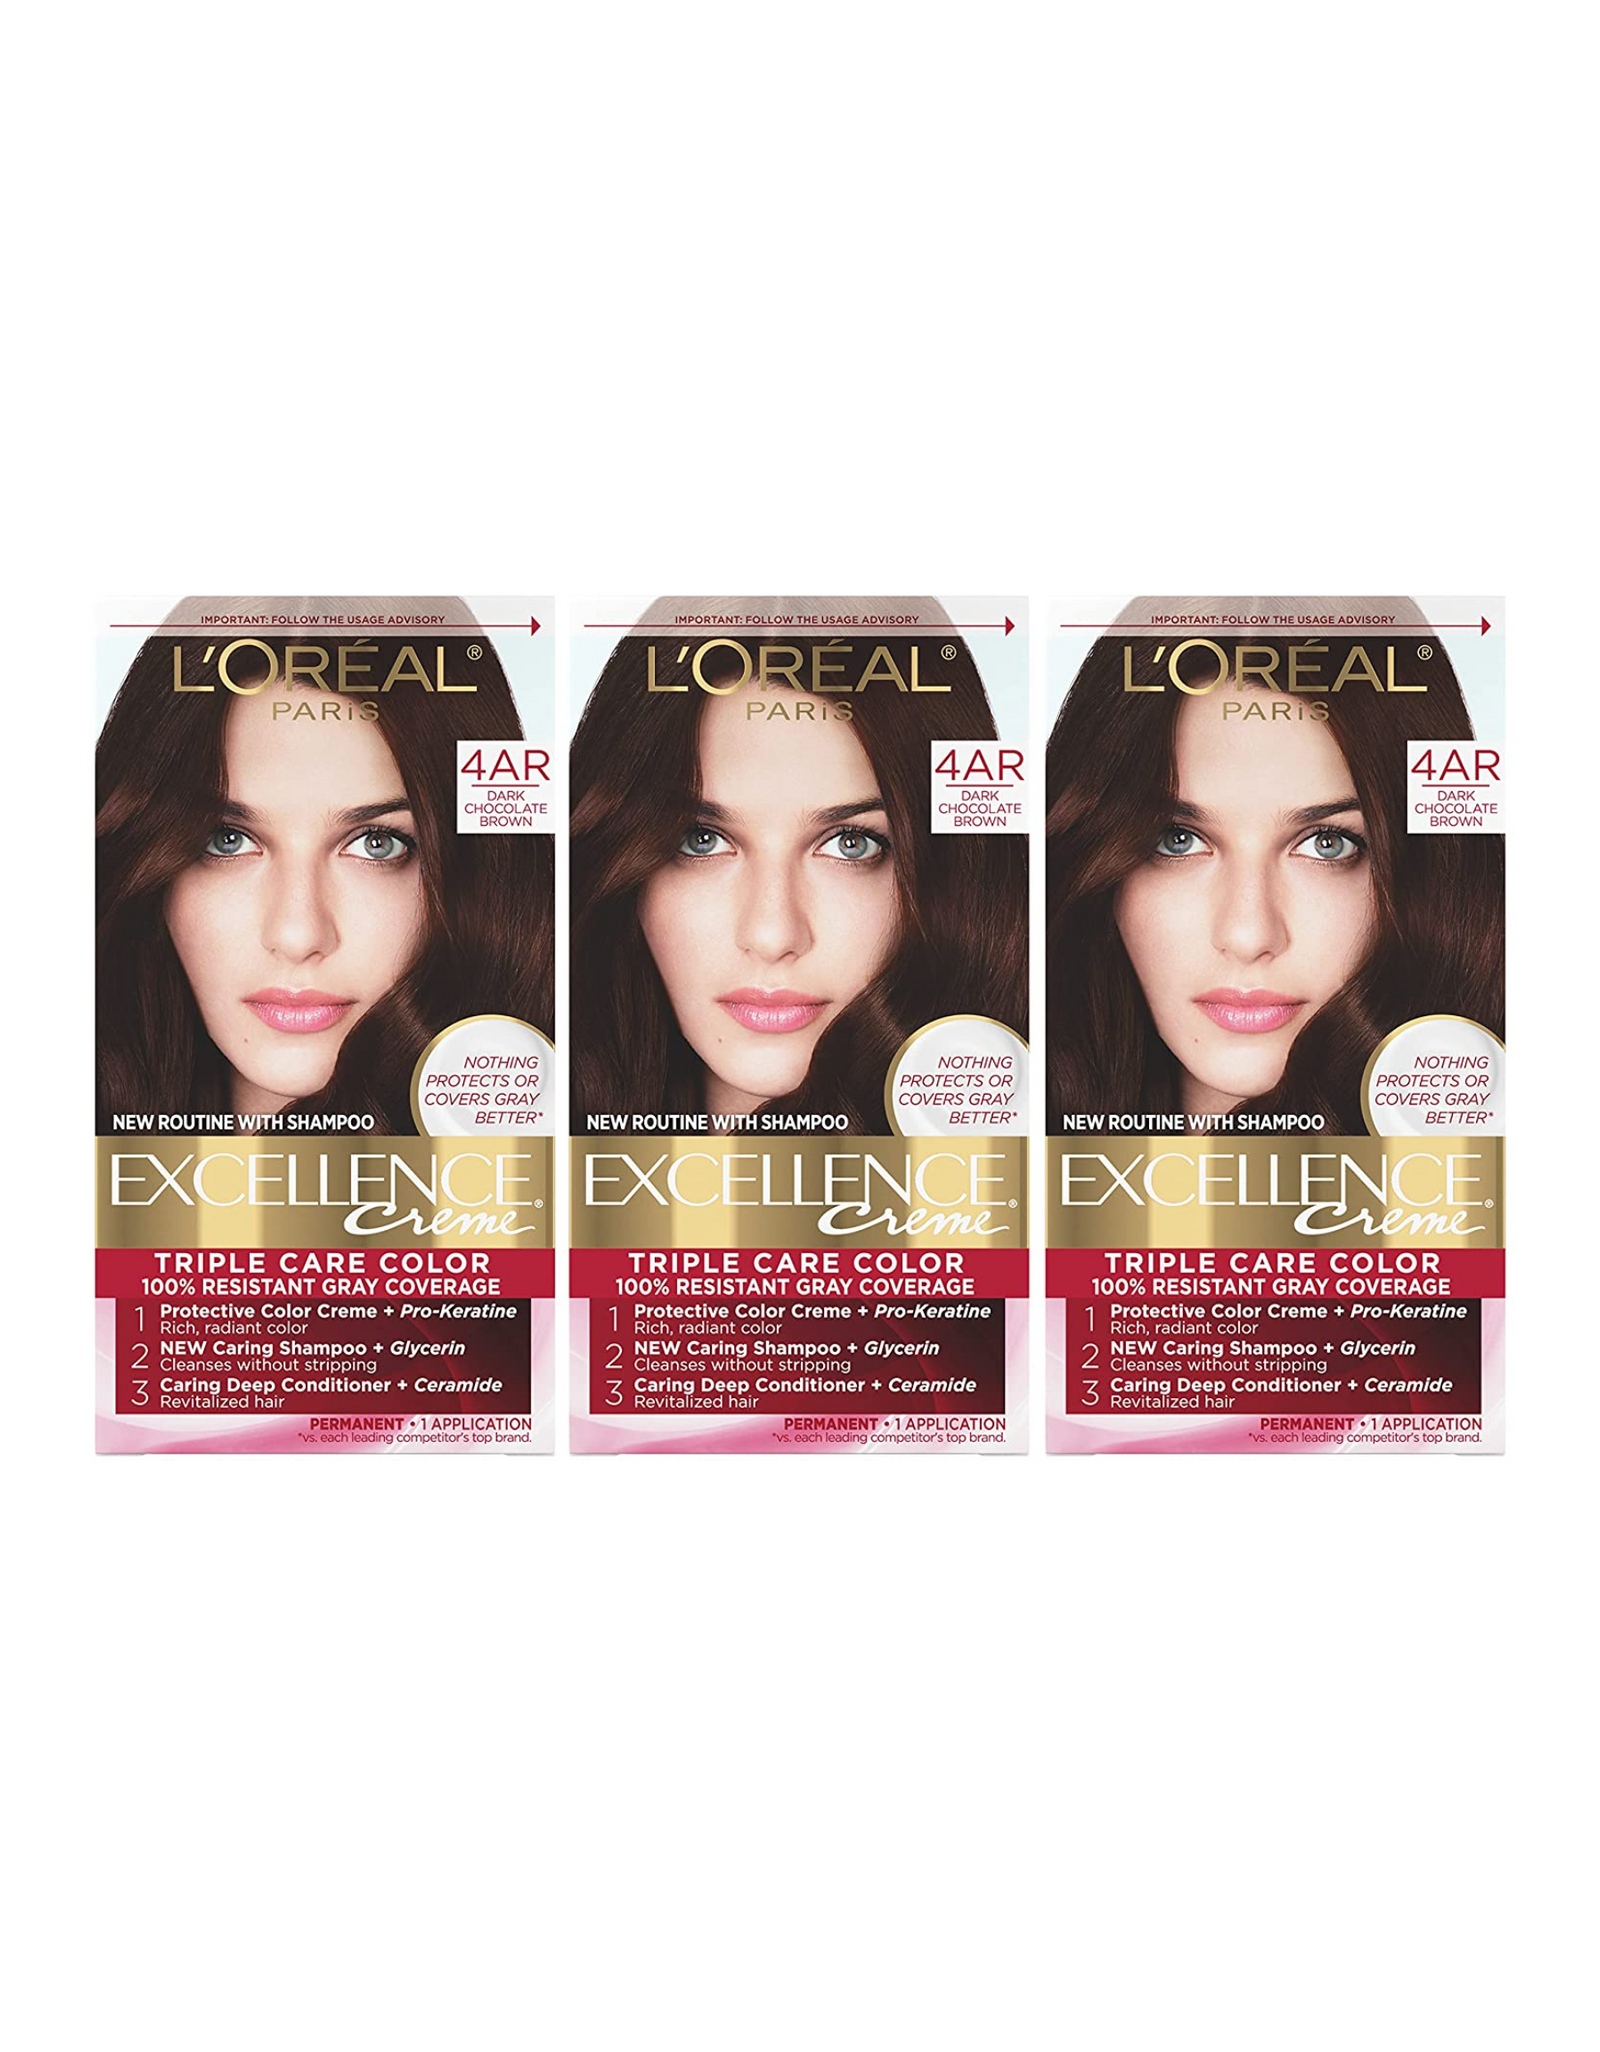 L'Oreal Paris Excellence Creme Permanent Hair Color, 4AR Dark Chocolate Brown, Pack of 3